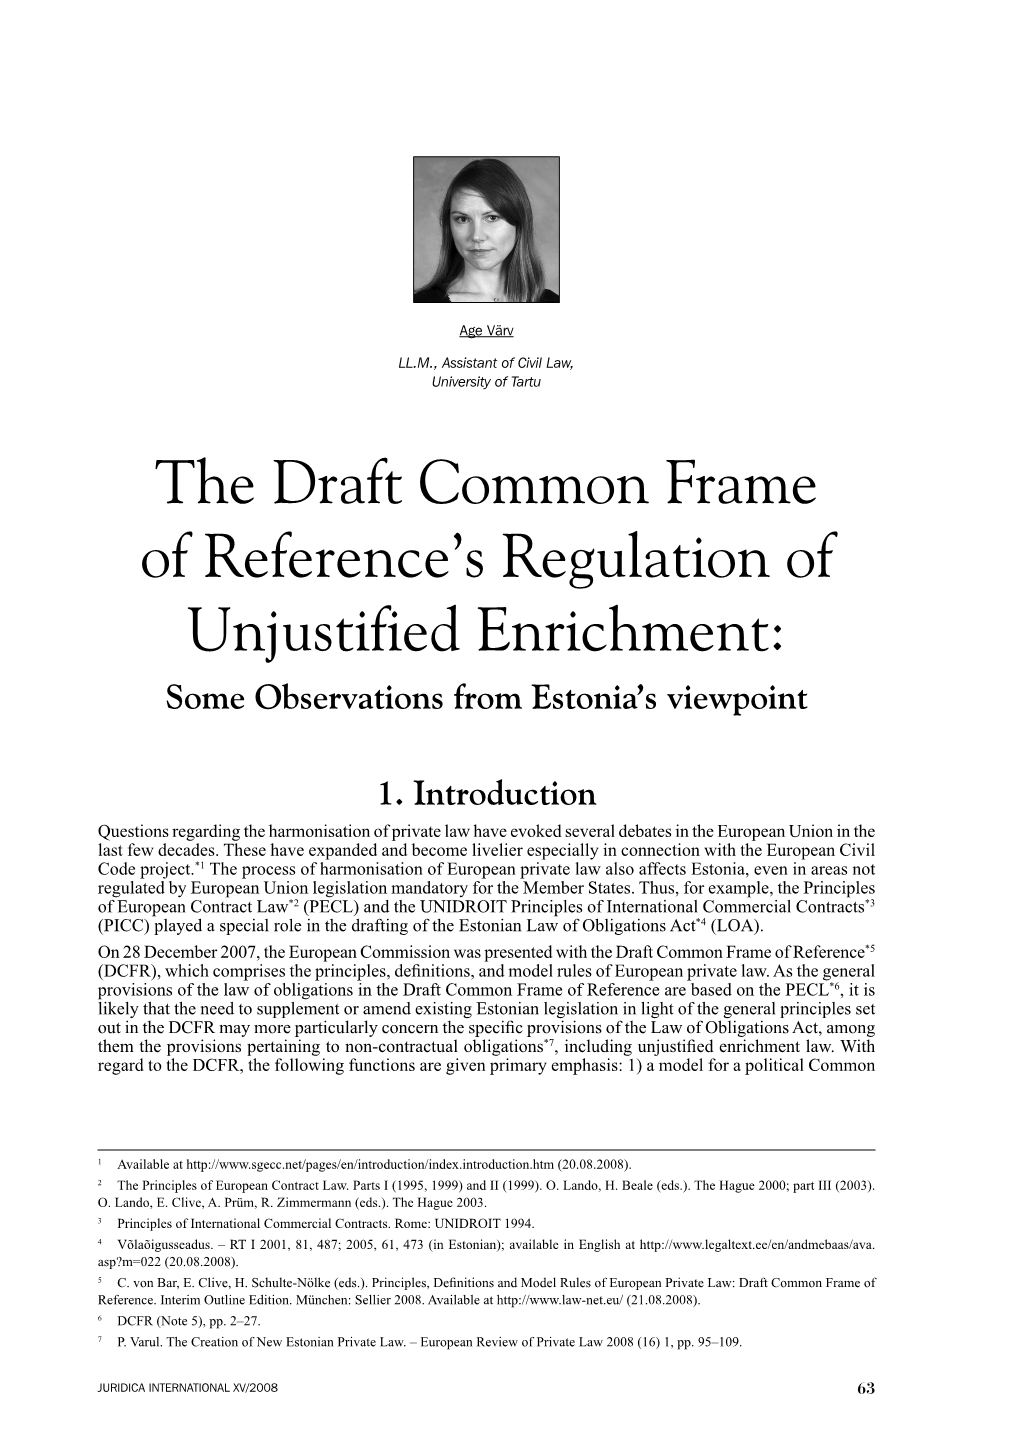 The Draft Common Frame of Reference's